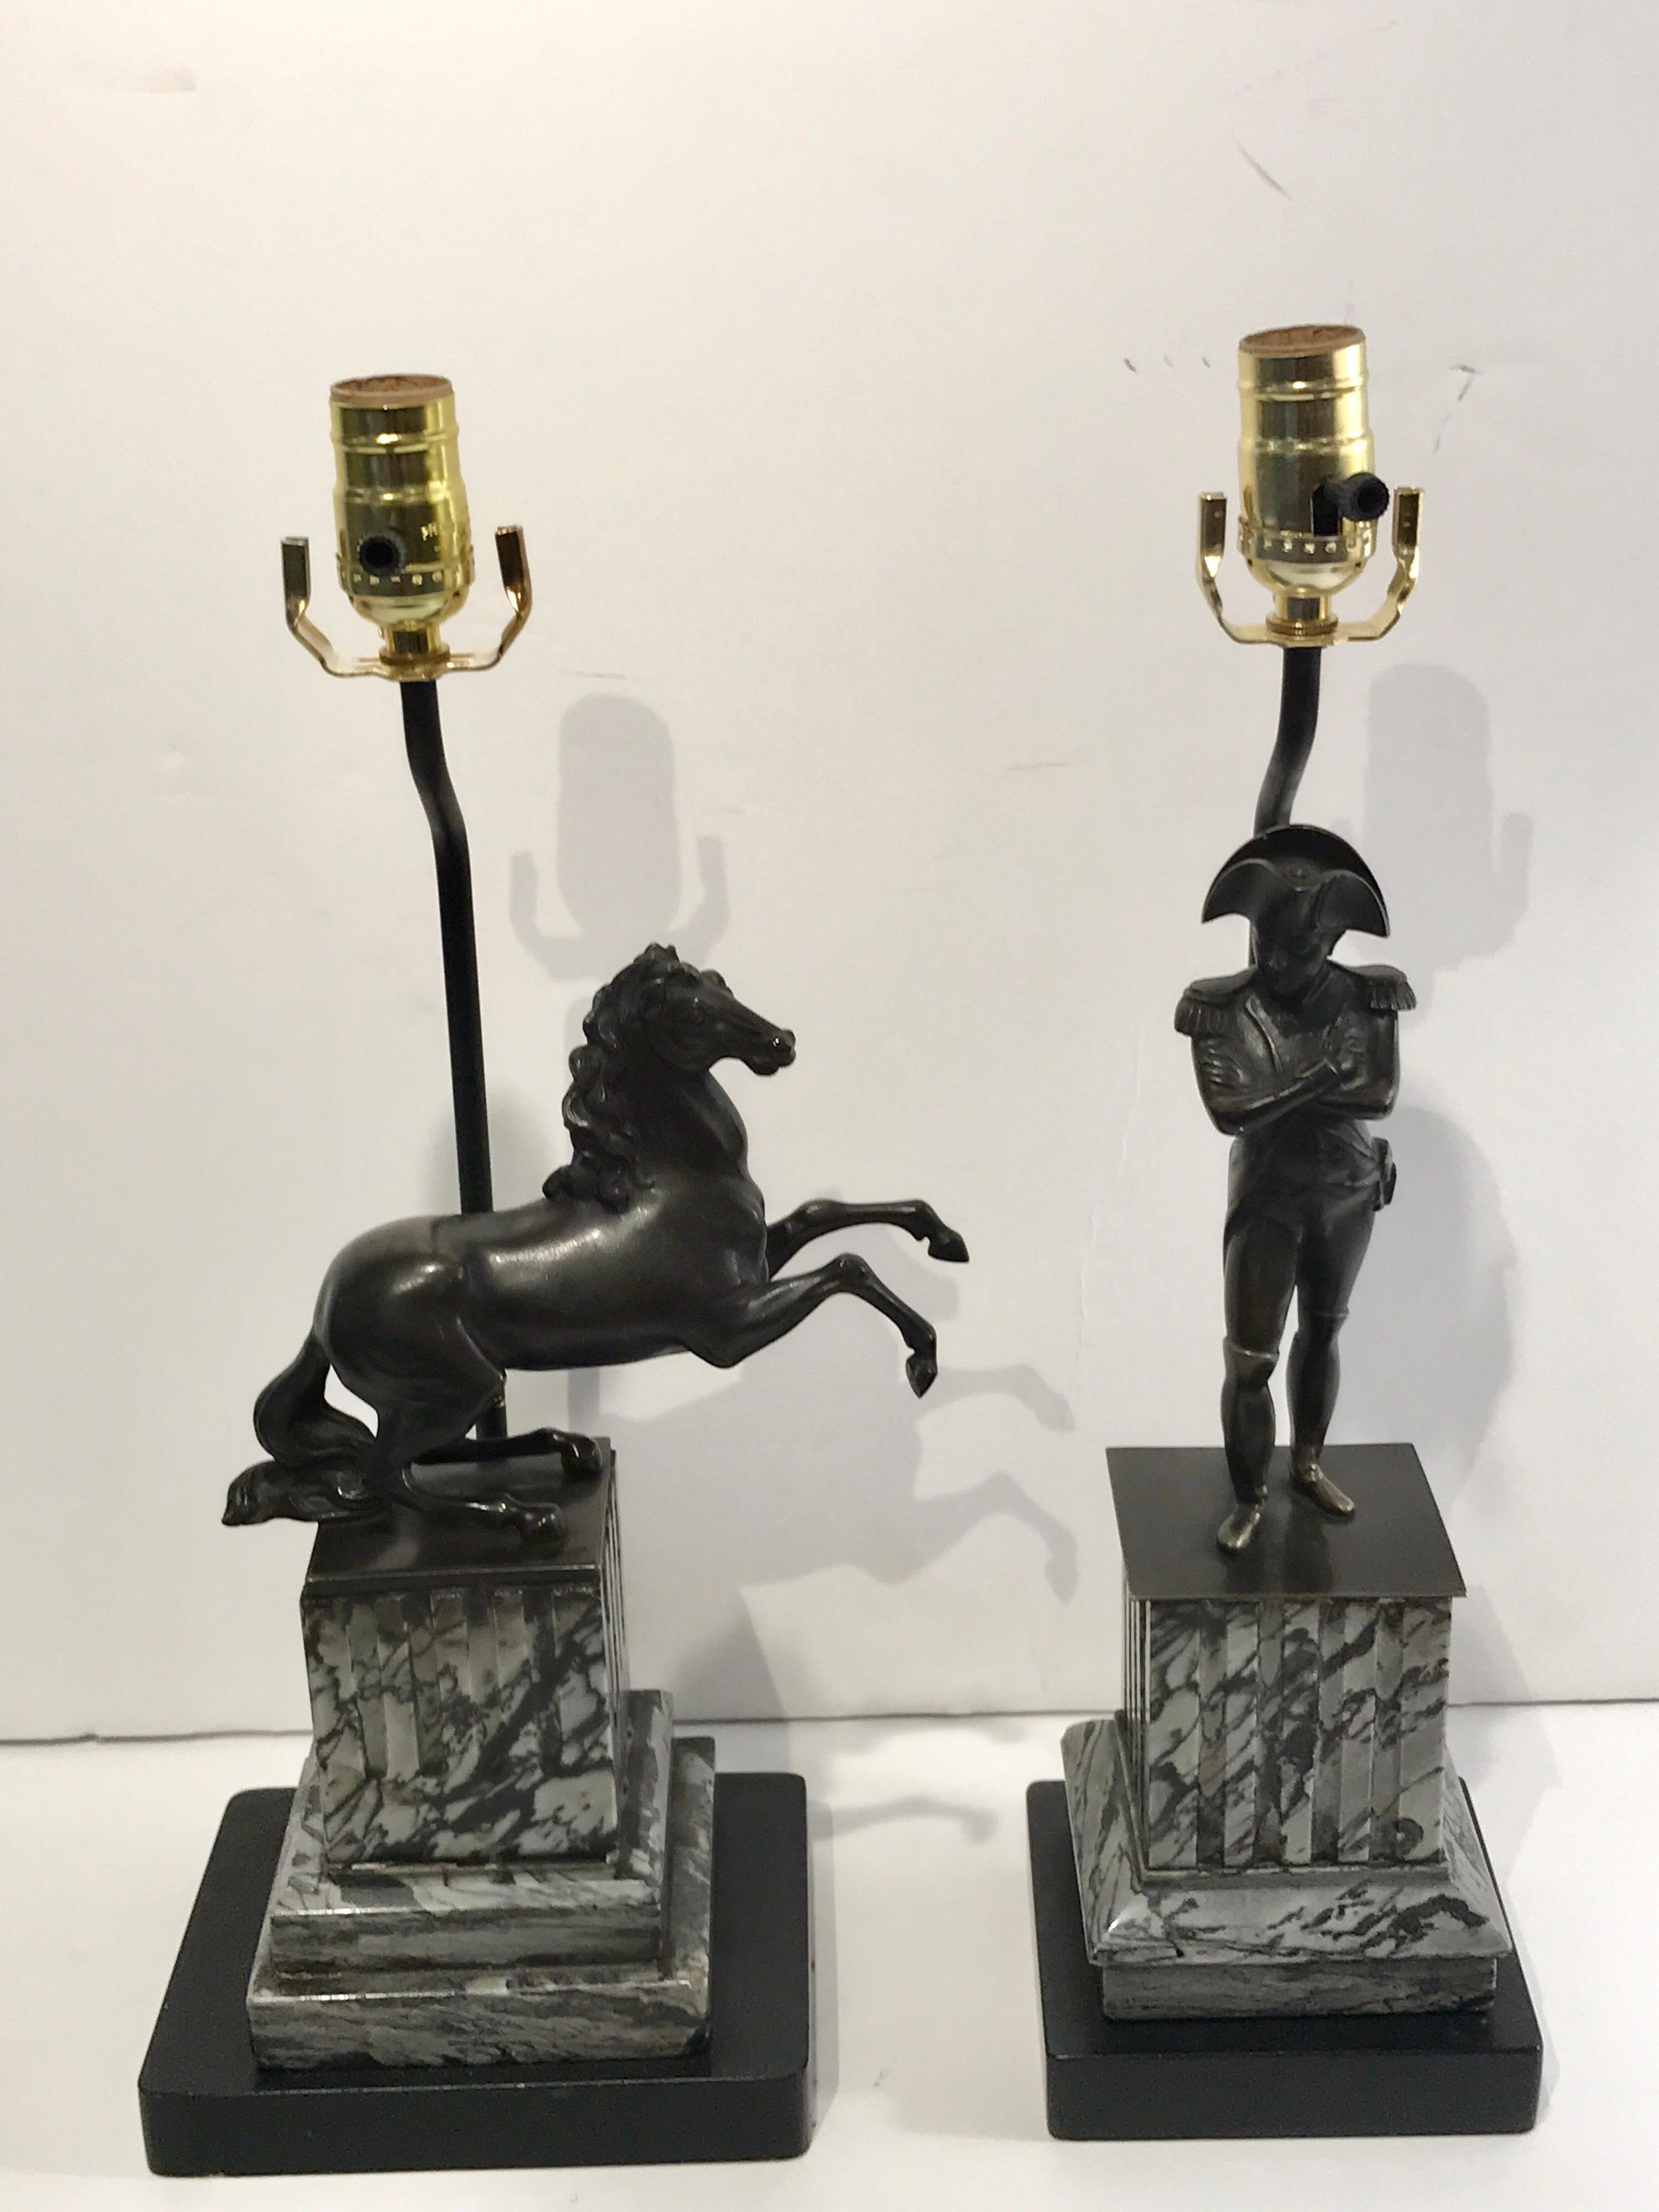 Pair of Empire bronzes, Napoleon & Marengo, now as lamps, one of a military dressed Napoleon with crossed arms the other a rearing model of his war horse Marengo. Both raised on carved black and gray marble plinth bases
Napoleon: 5.5